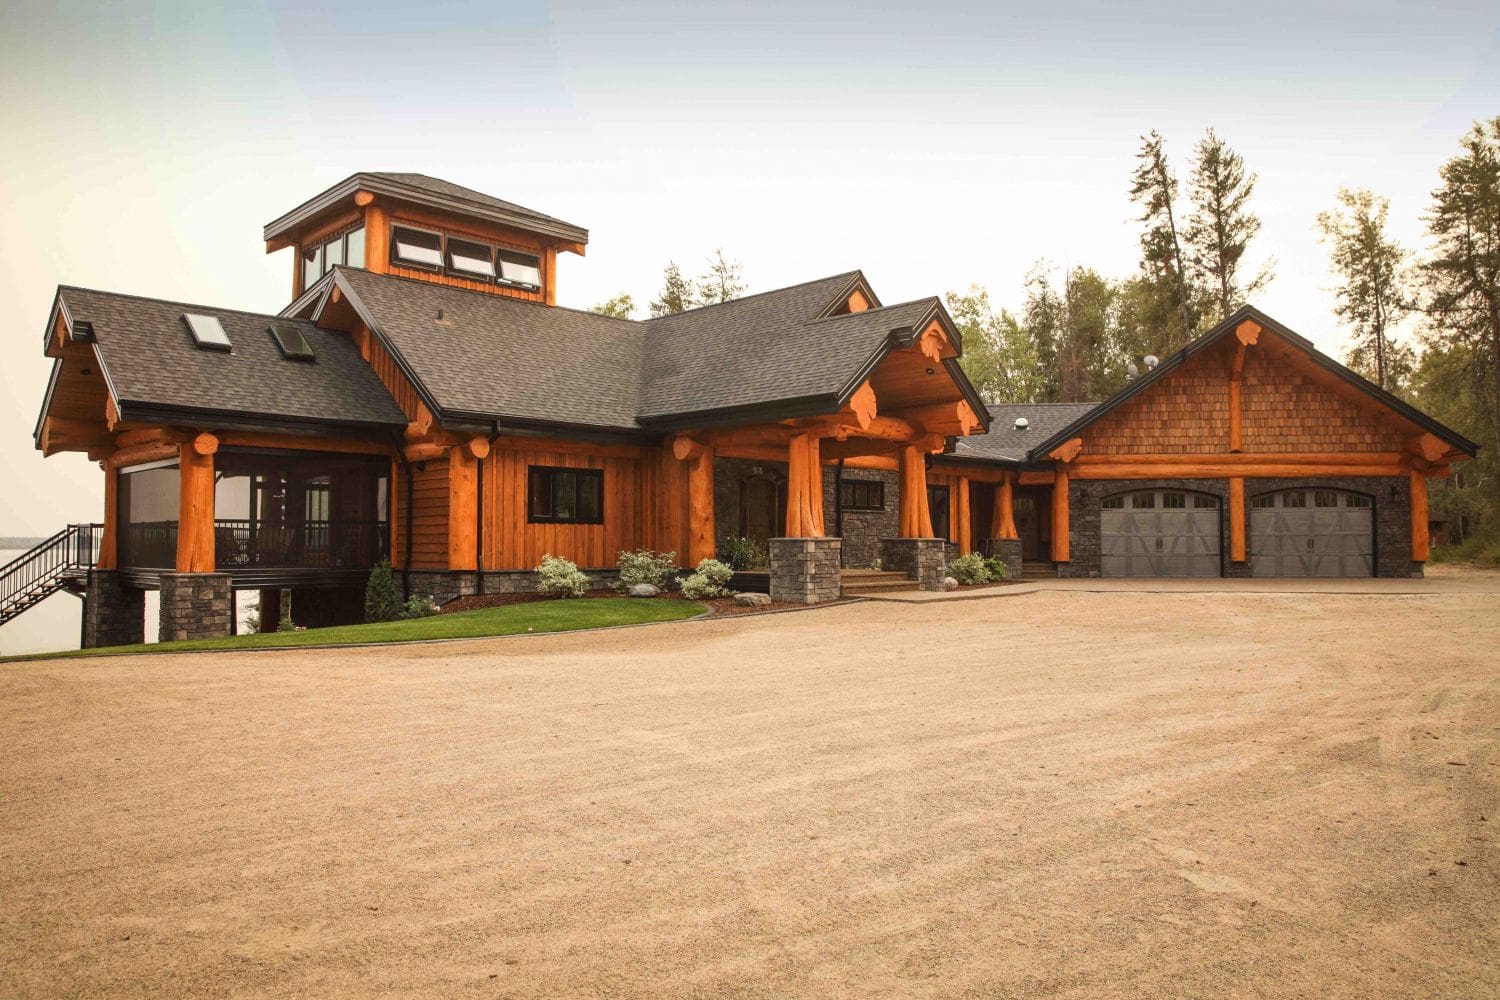 driveway-and-garage-view-of-log-home